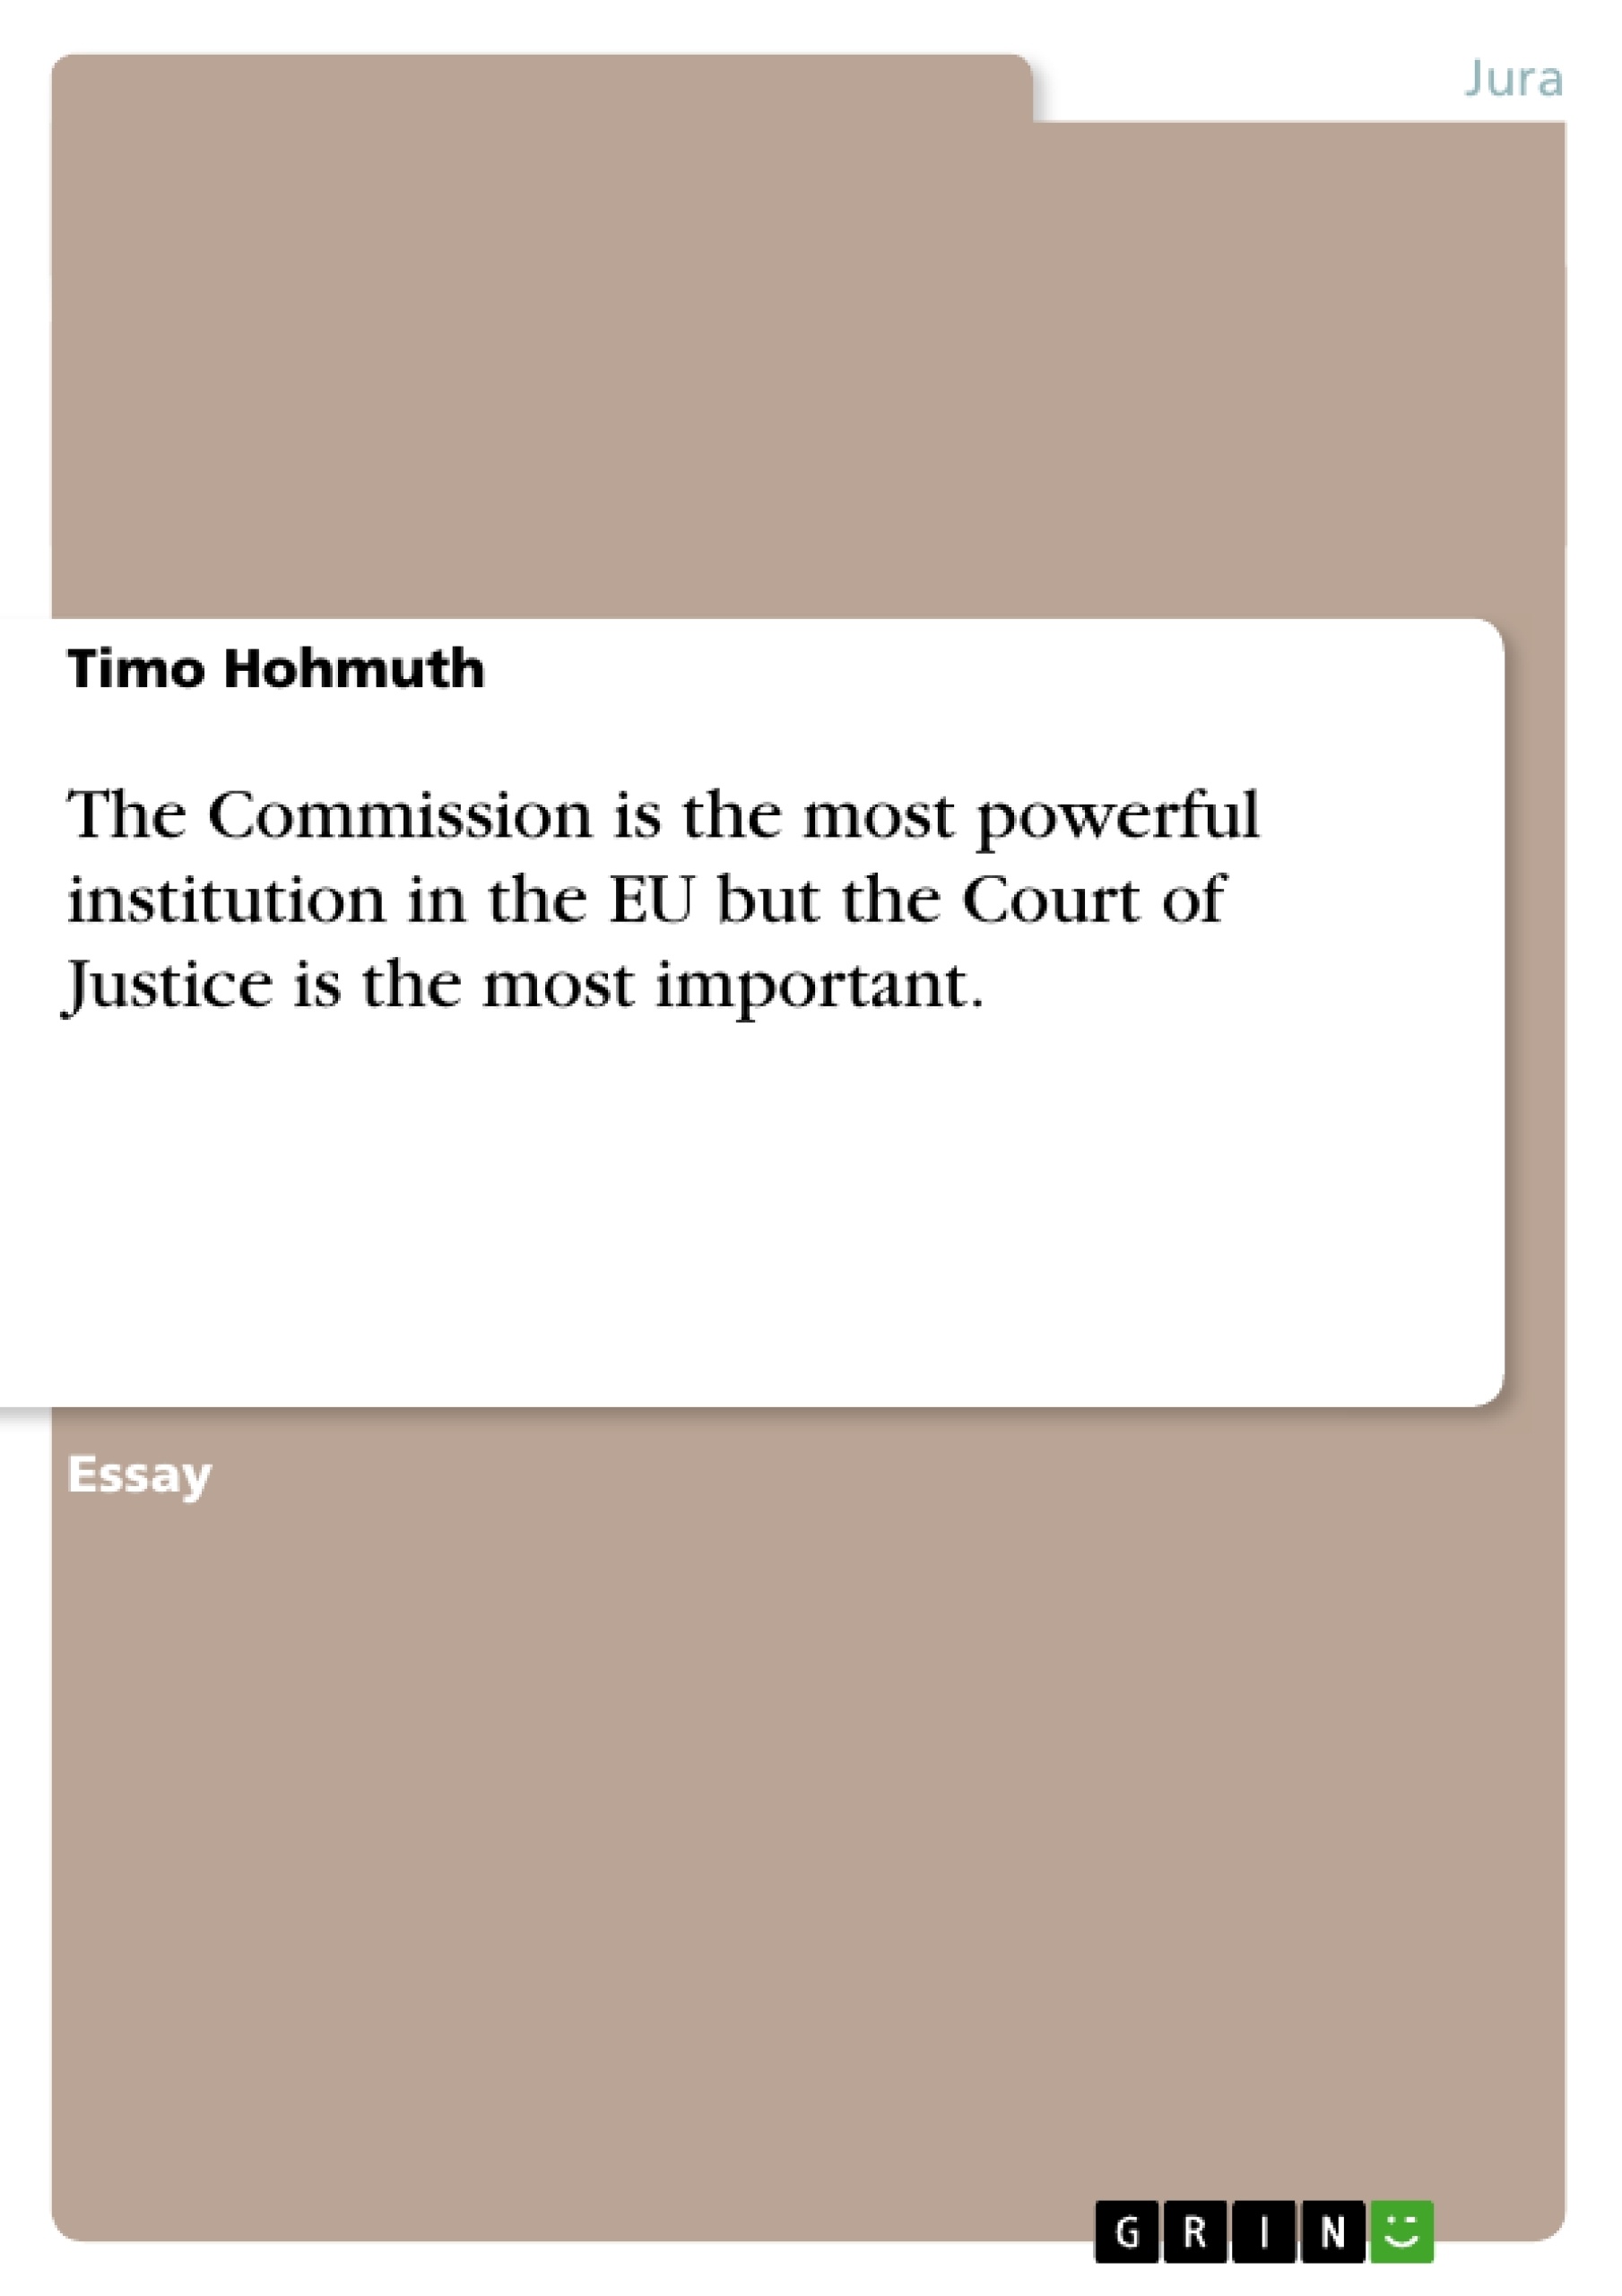 Titel: The Commission is the most powerful institution in the EU but the Court of Justice is the most important.